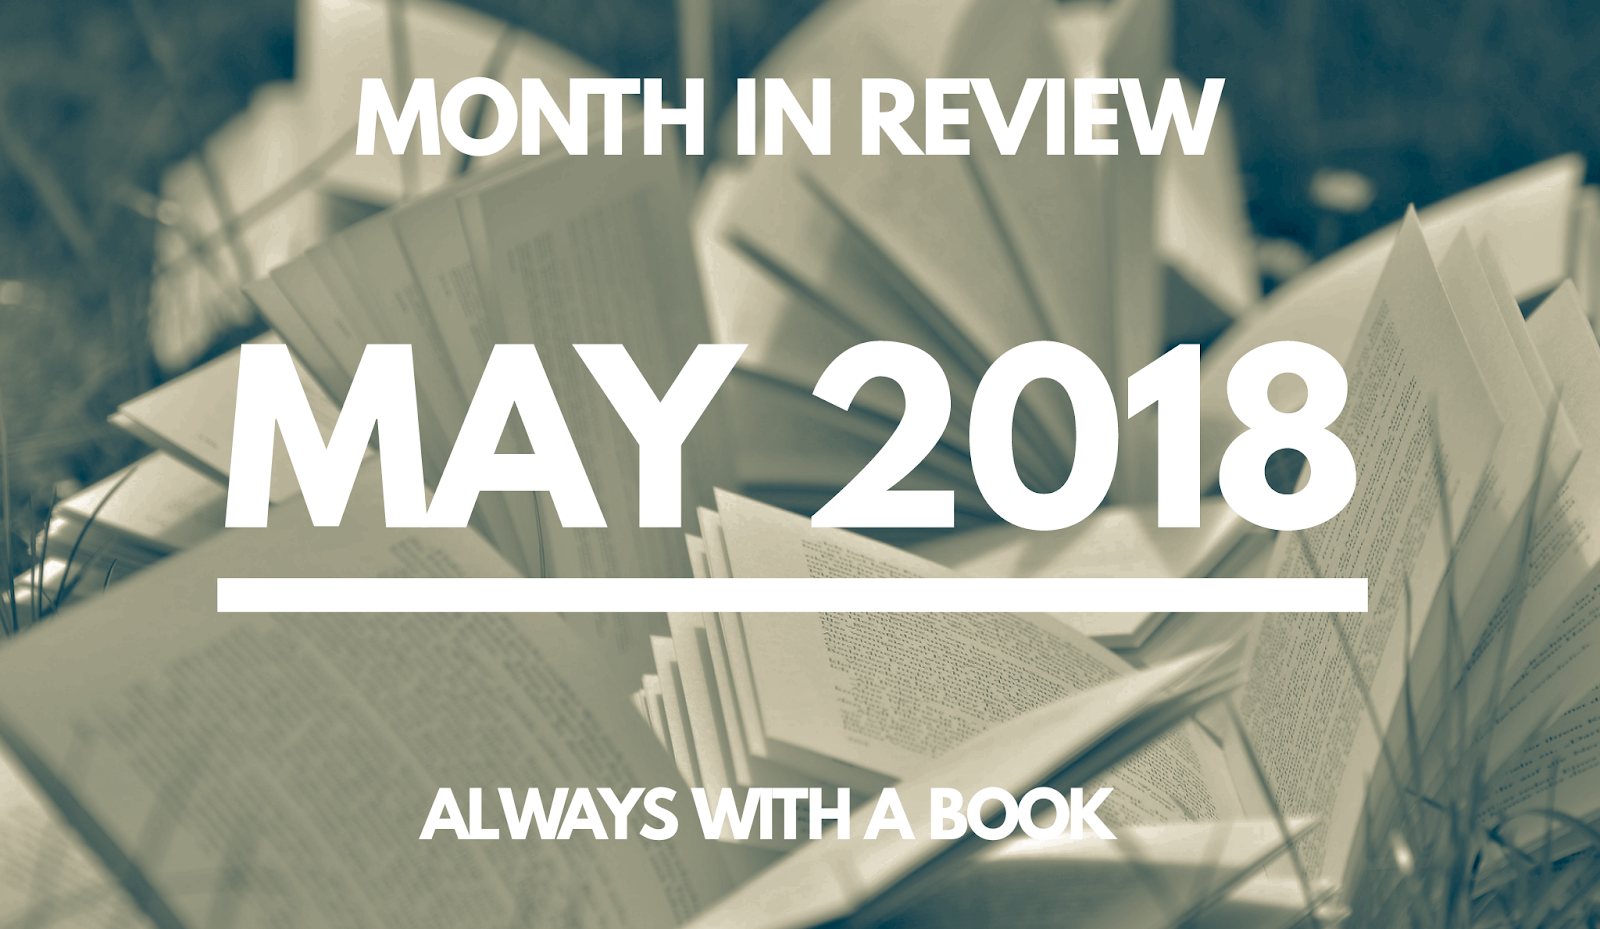 Month in Review: May 2018